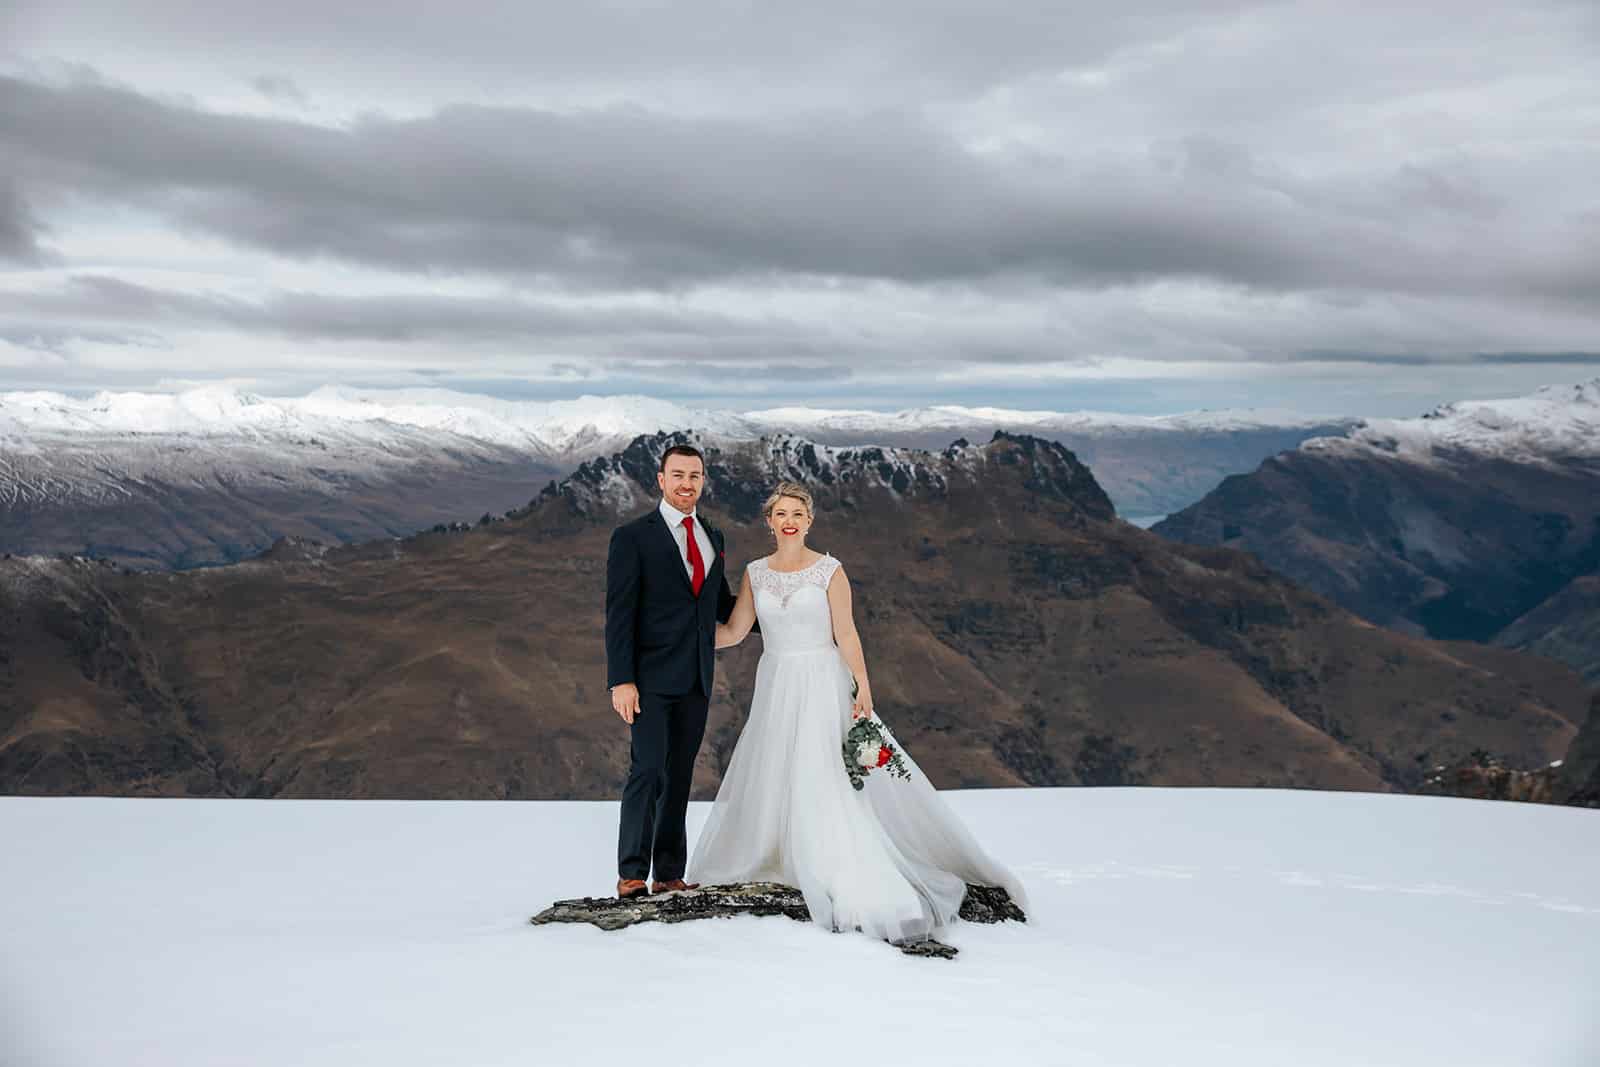 Queenstown Helicopter elopement in the snow on Cecil Peak